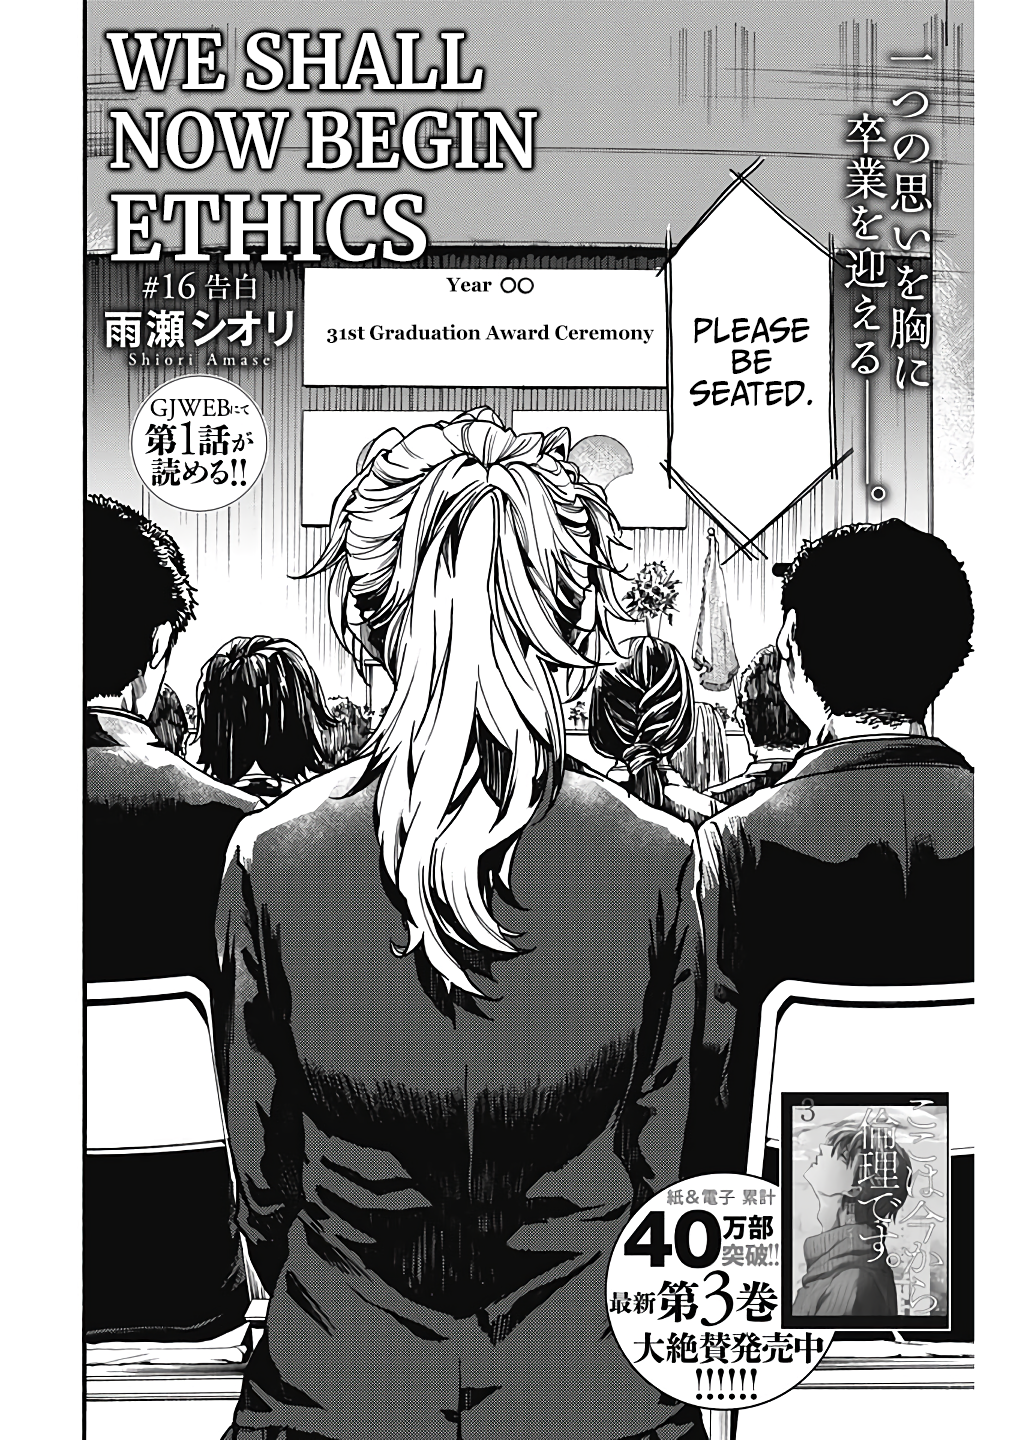 From Now On We Begin Ethics. - Page 2